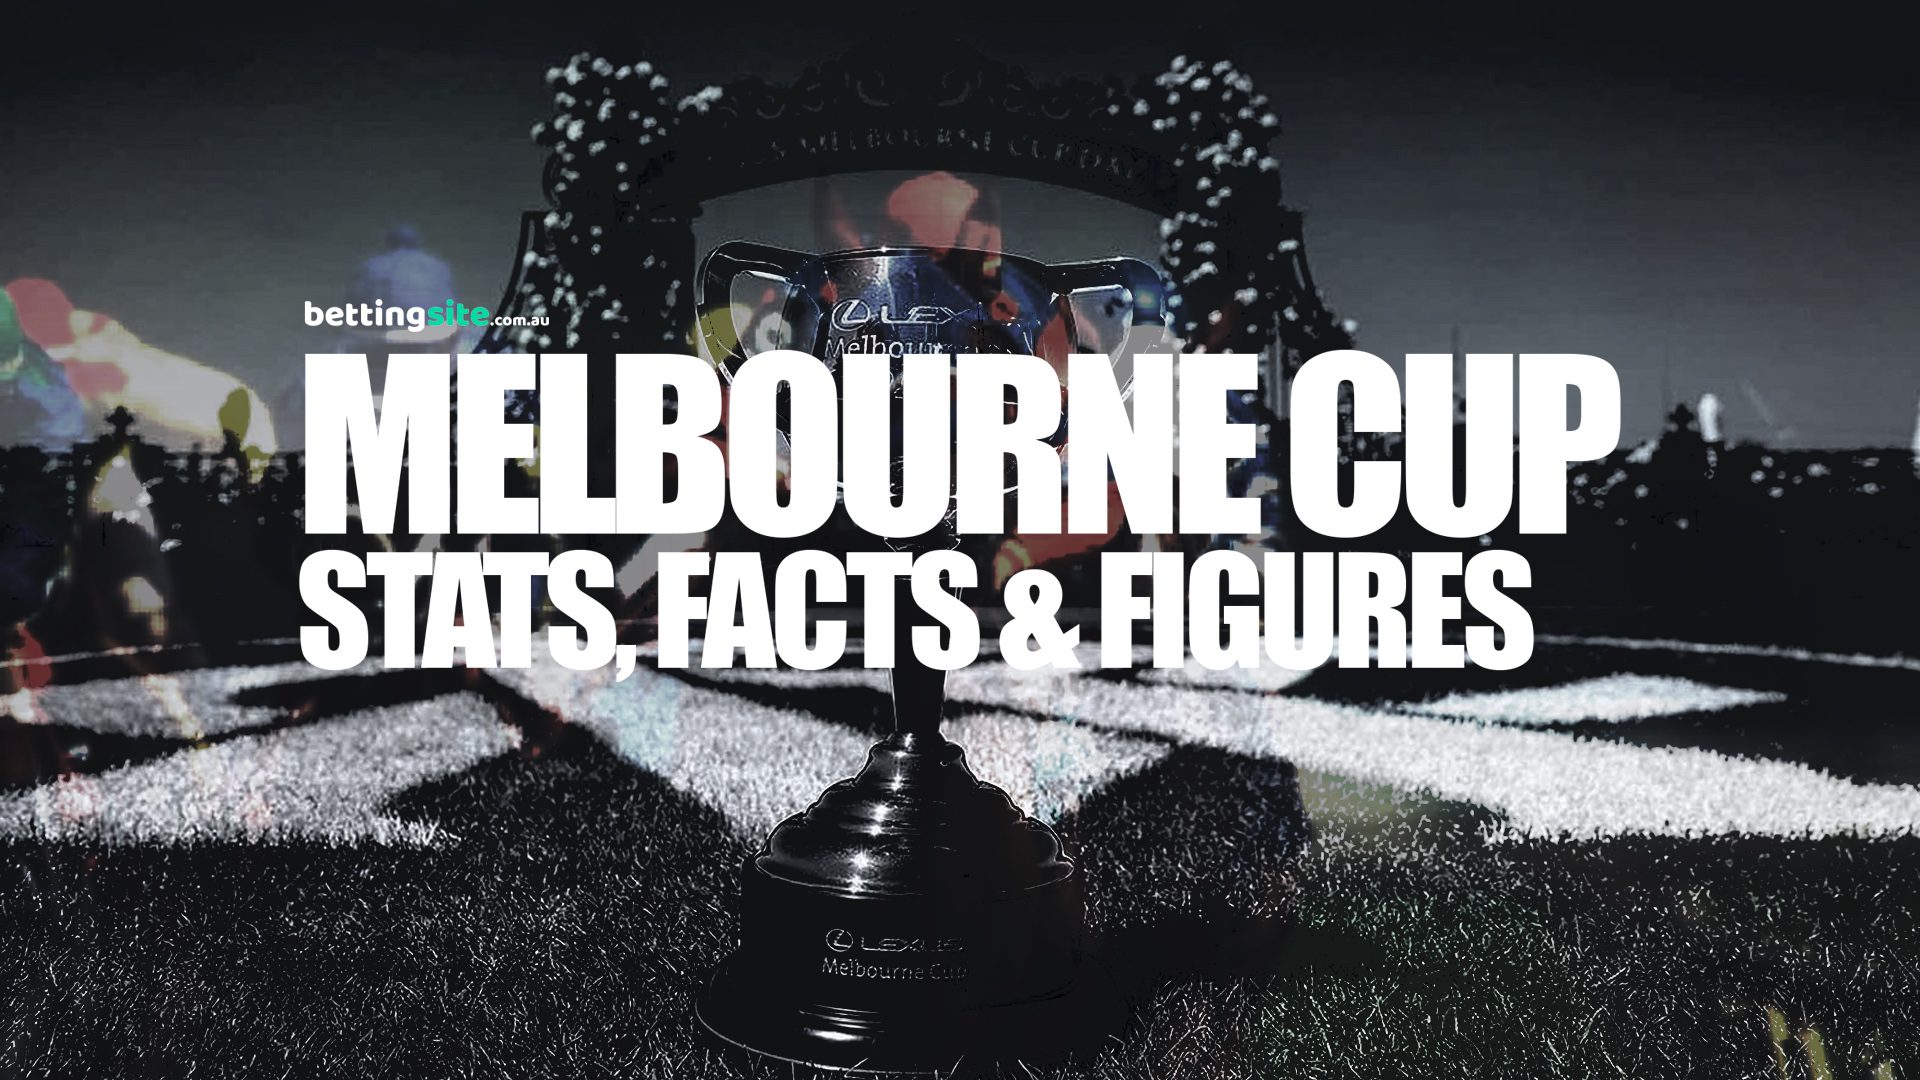 Melbourne Cup Stats, Facts & Figures